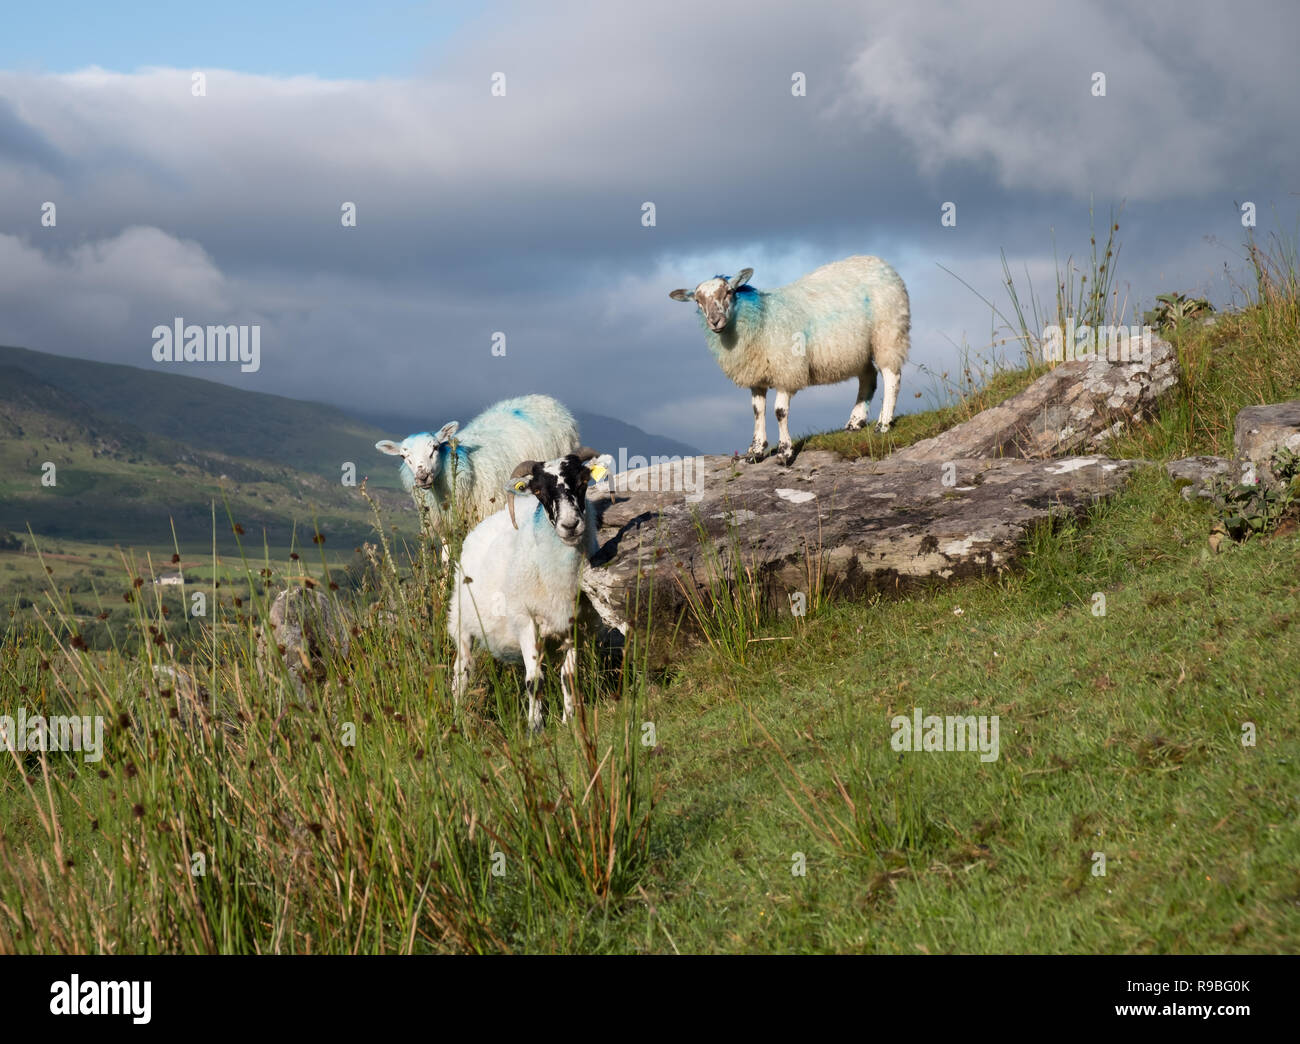 Pastoral scene in Ireland featuring three sheep on a rocky outcrop and dark...